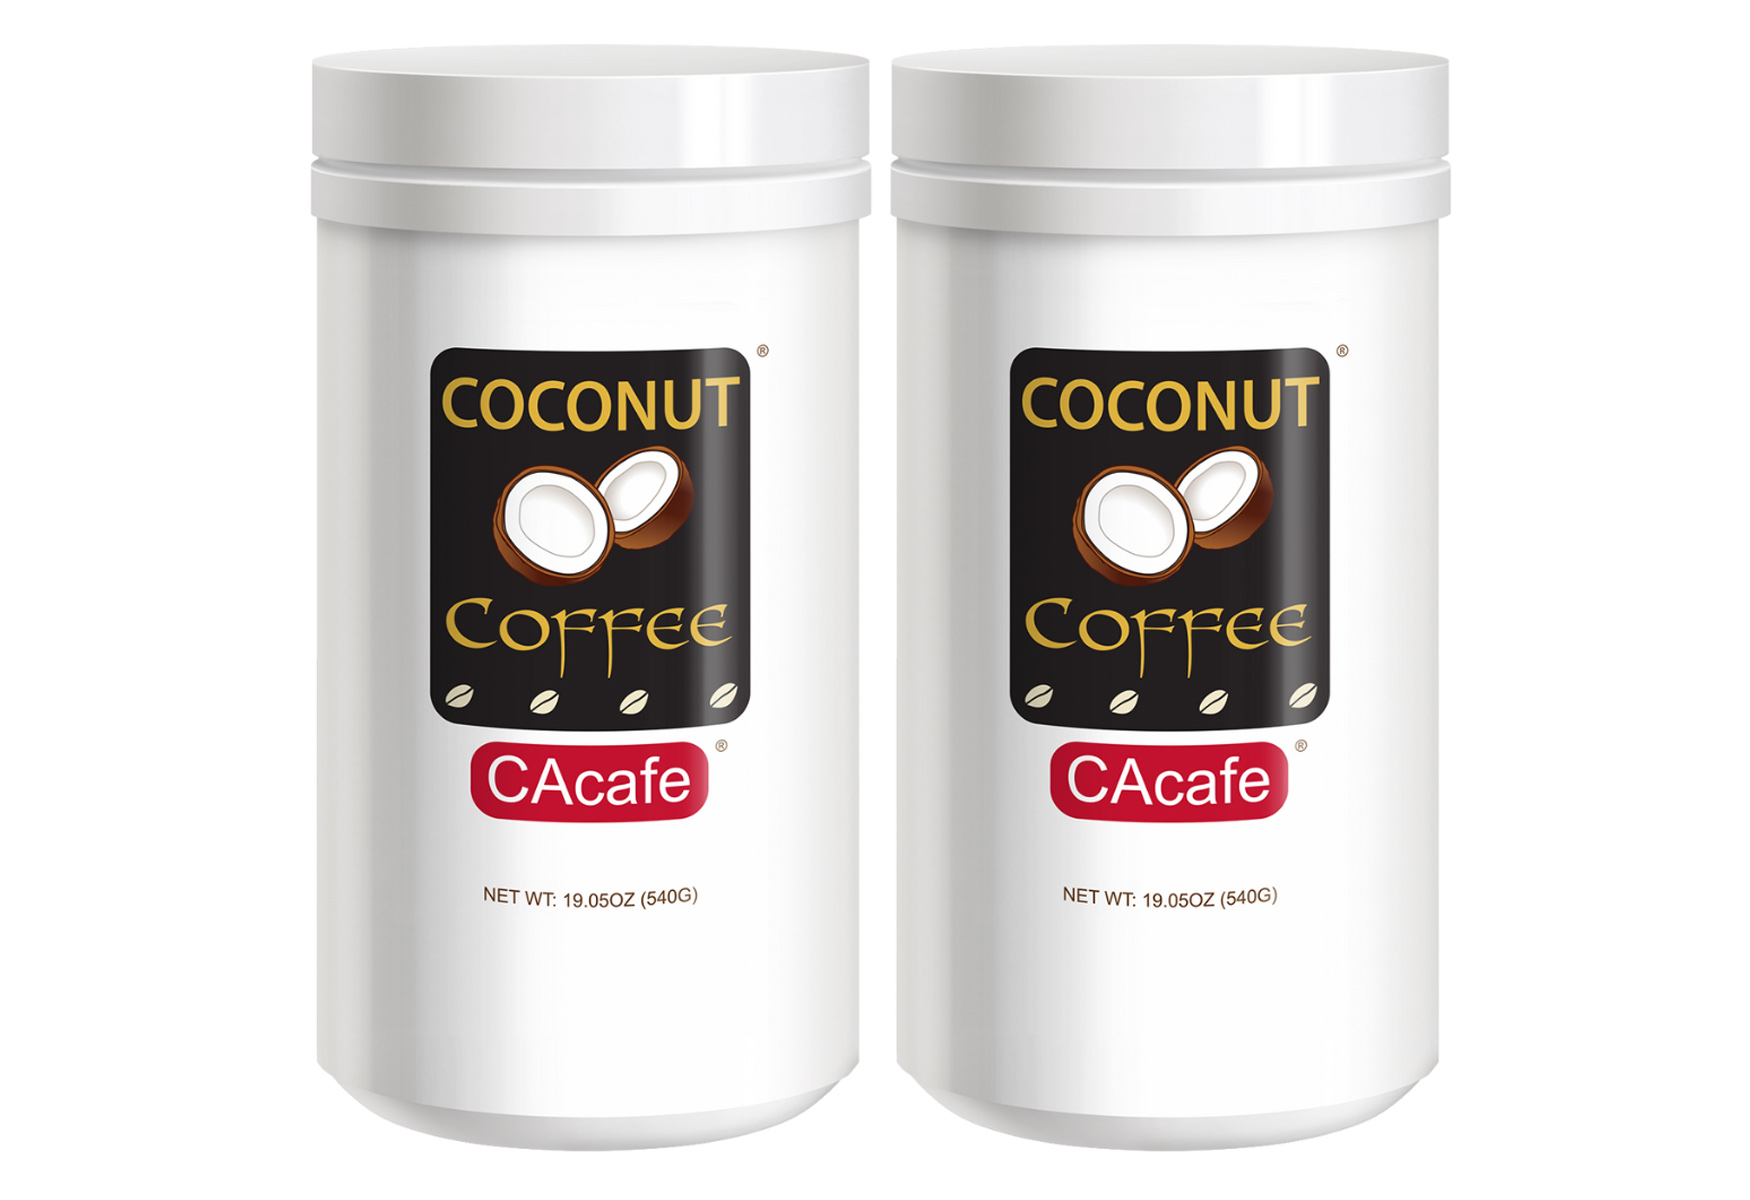 18-cacafe-coconut-coffee-nutrition-facts